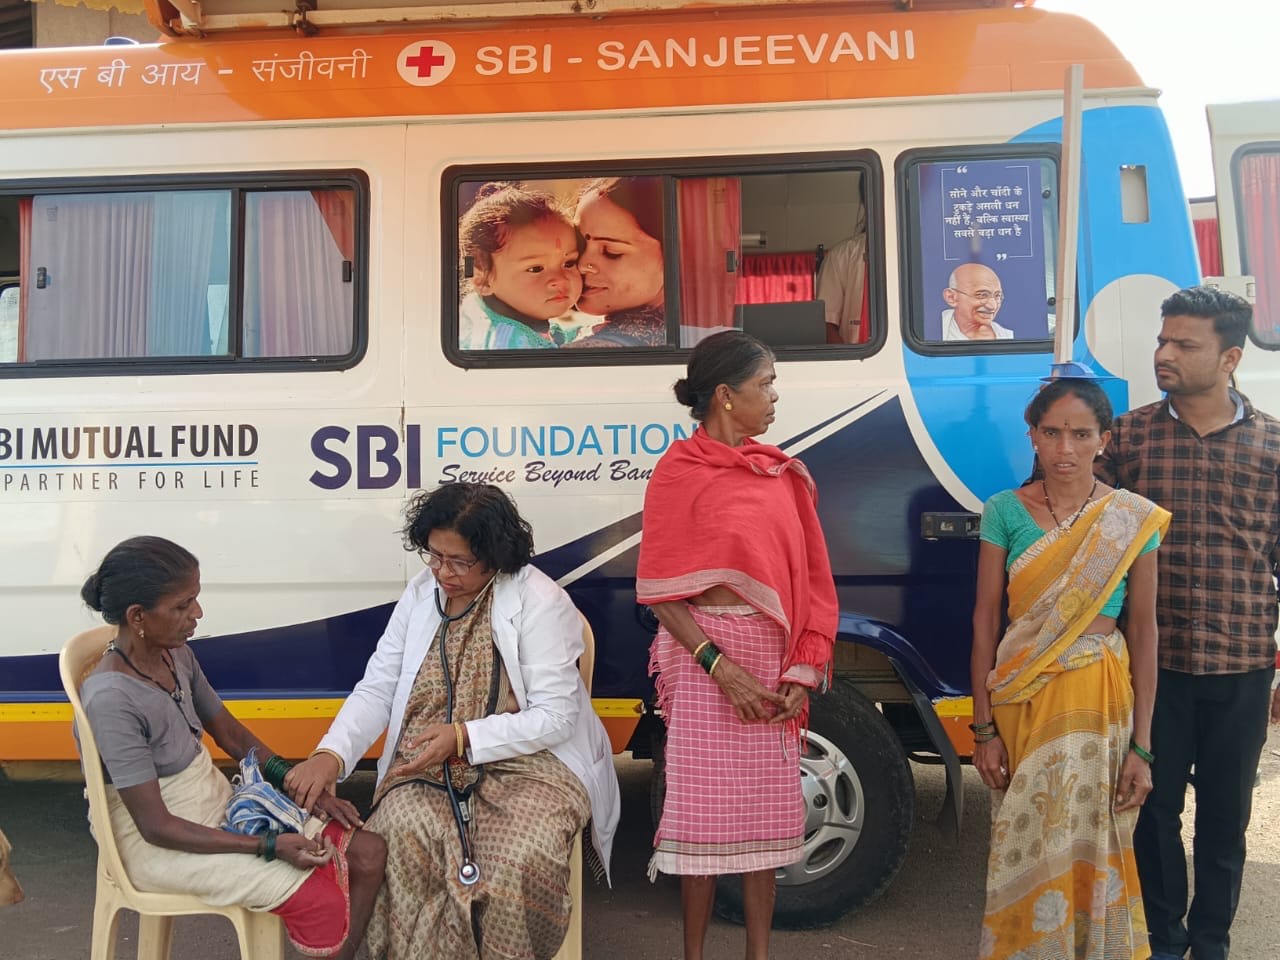 Why is the Medical Mobile Unit so important?